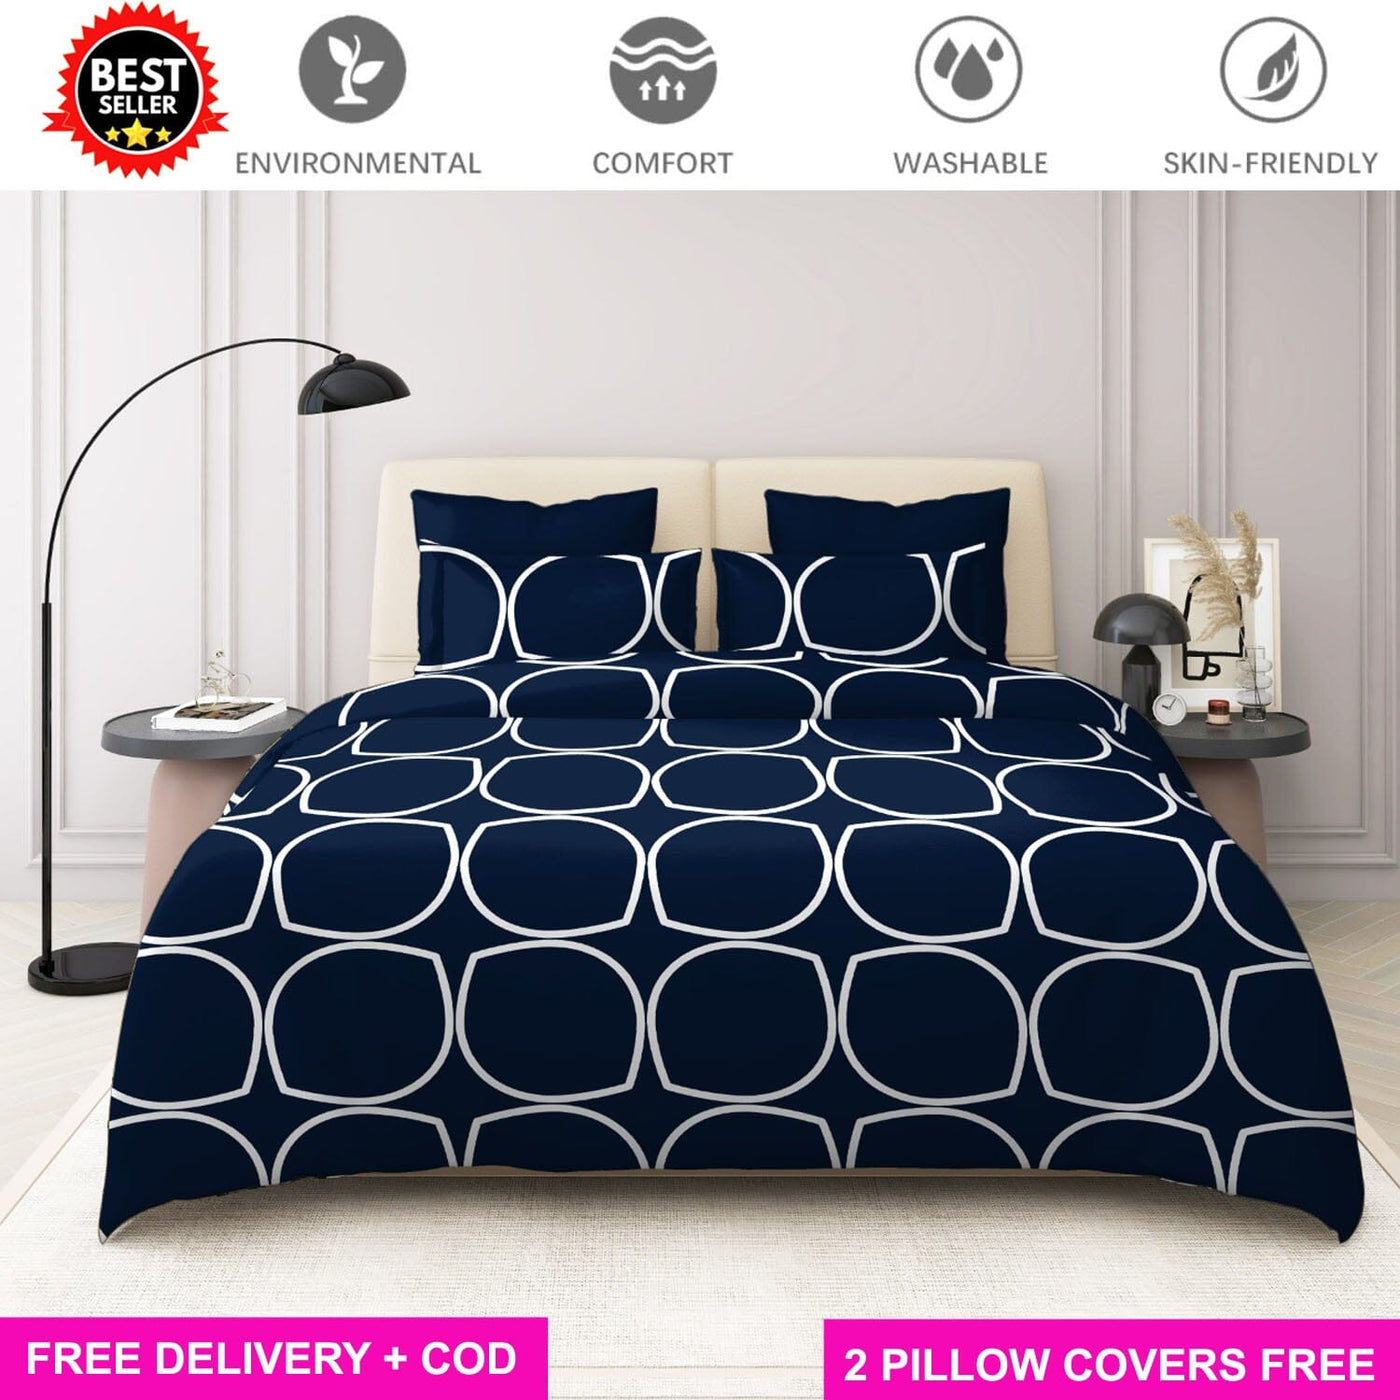 Blue Ellipse Full Elastic Fitted Bedsheet with 2 Pillow Covers - King Size Bed Sheets Great Happy IN 